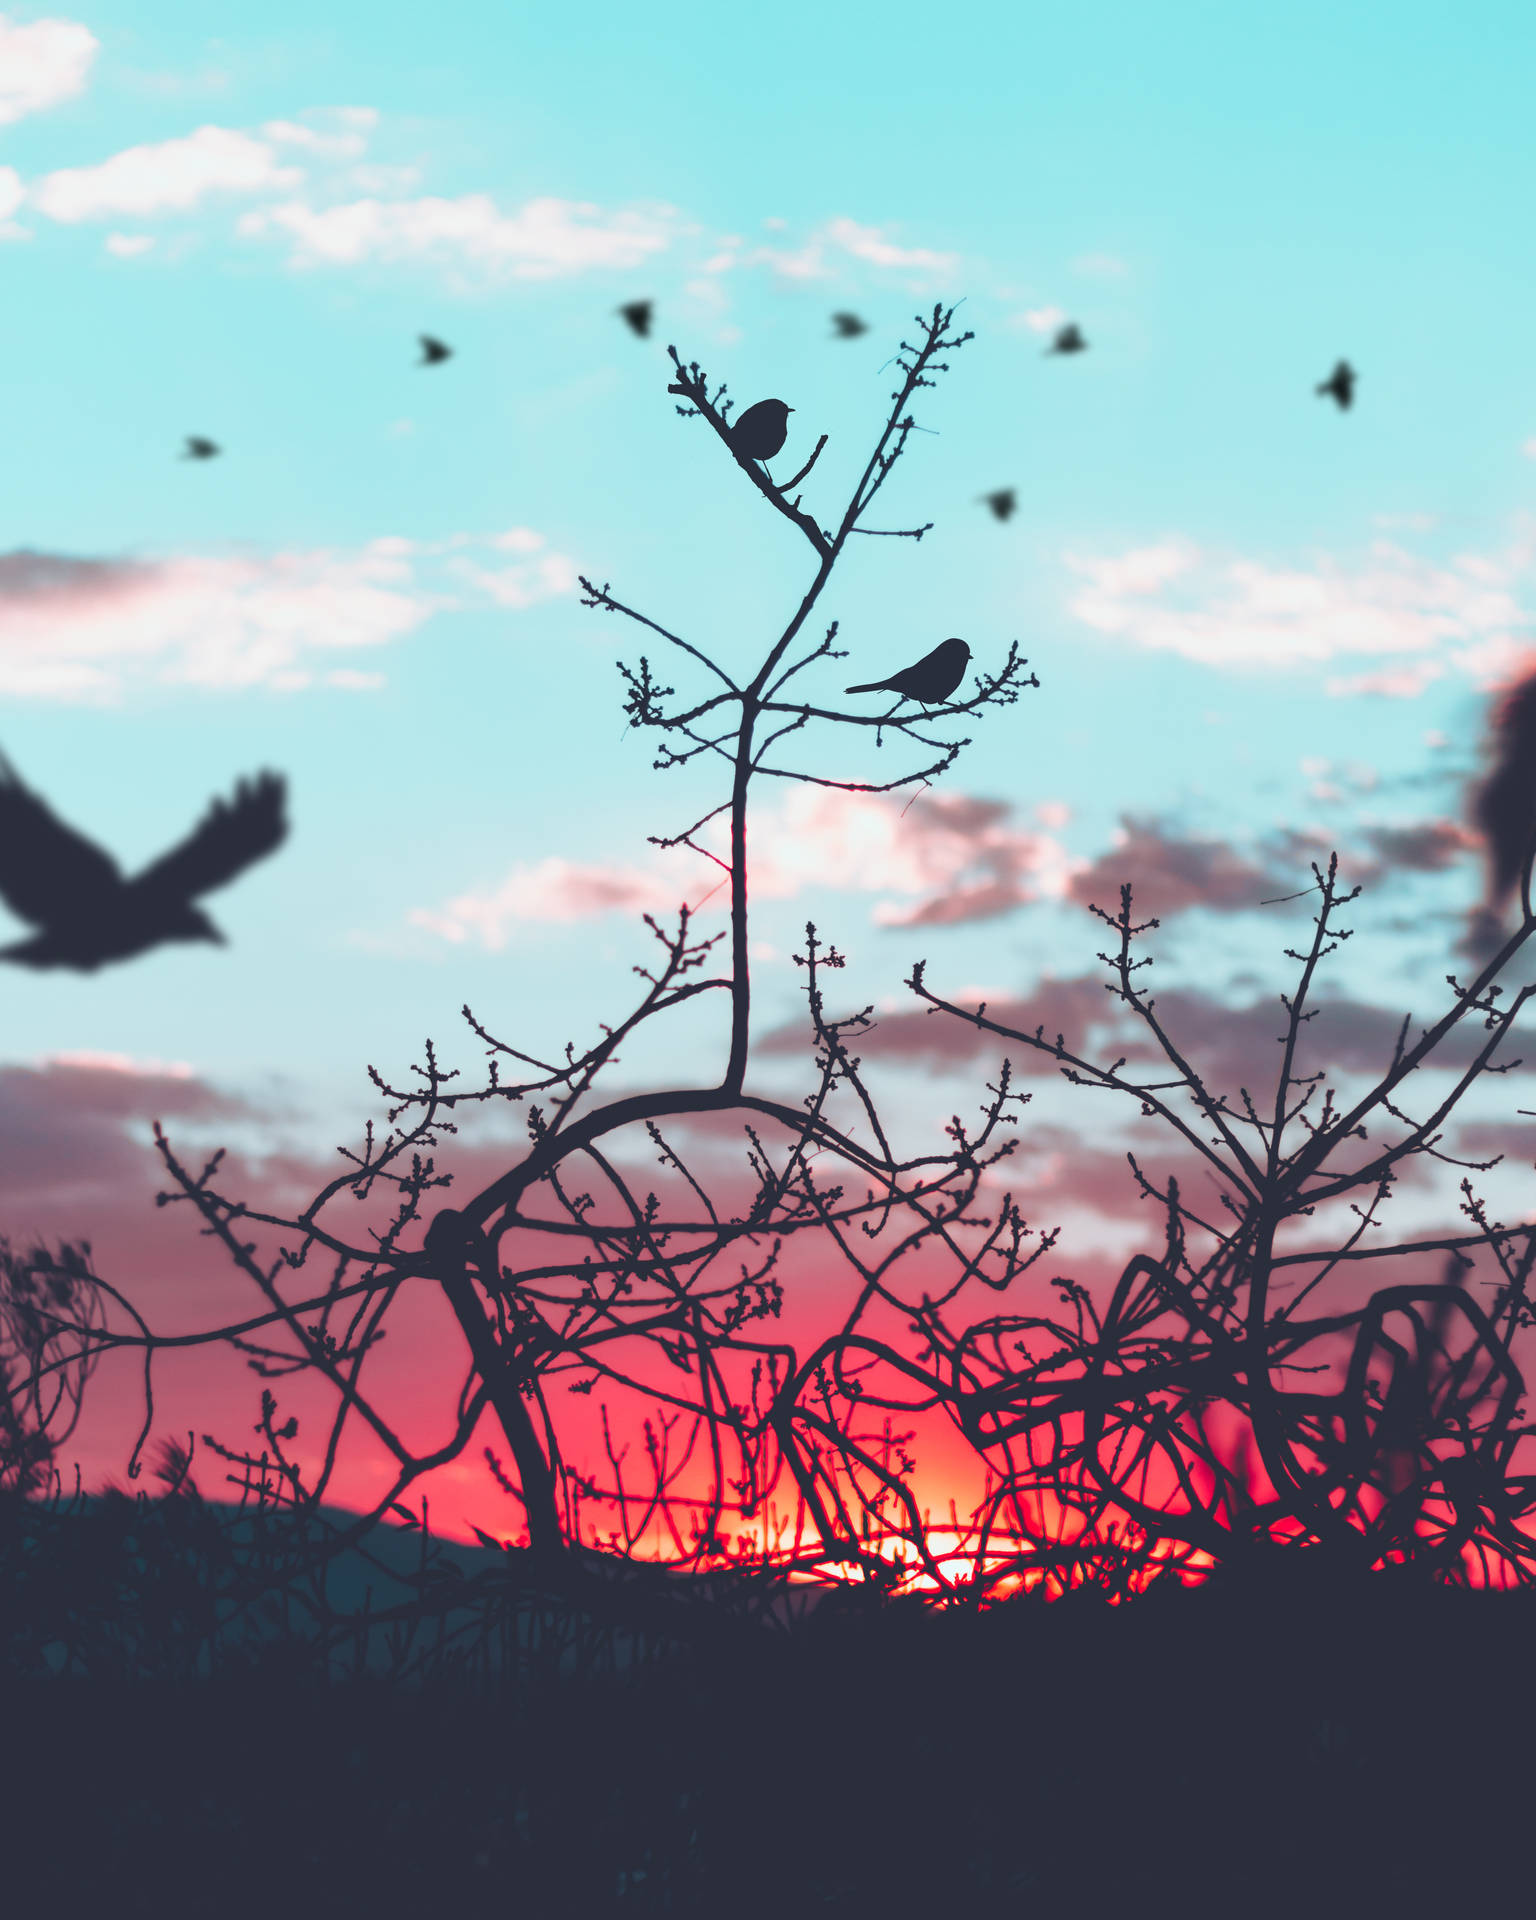 Silhouette Of Birds In Nature